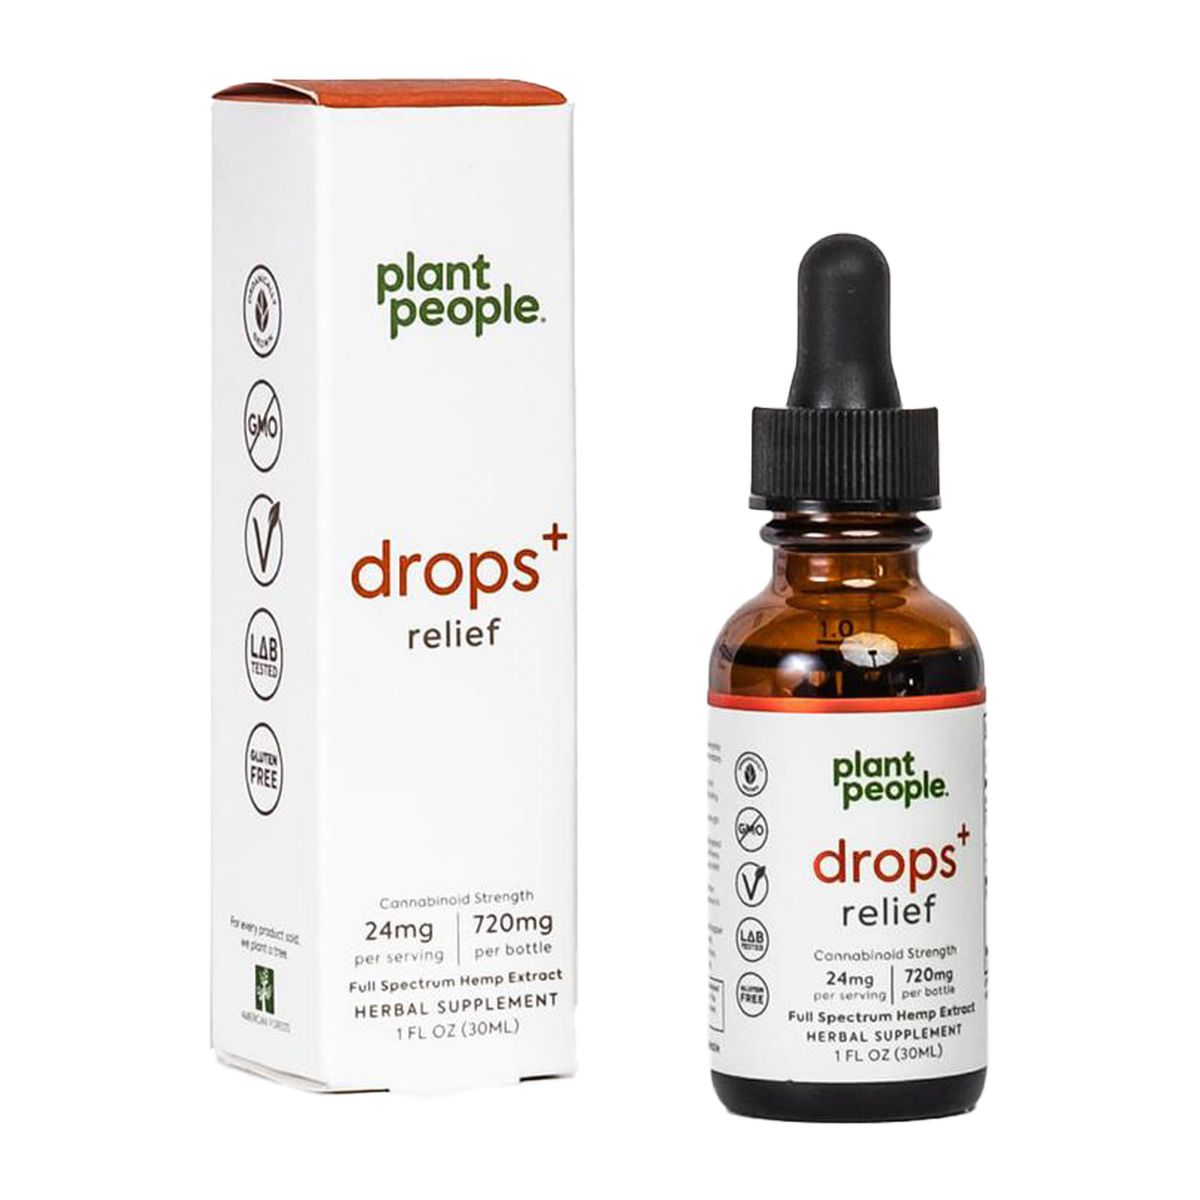 Plant-People-Drops-Relief-The-10-Best-CBD-Oils-For-Pain-Relief-Products